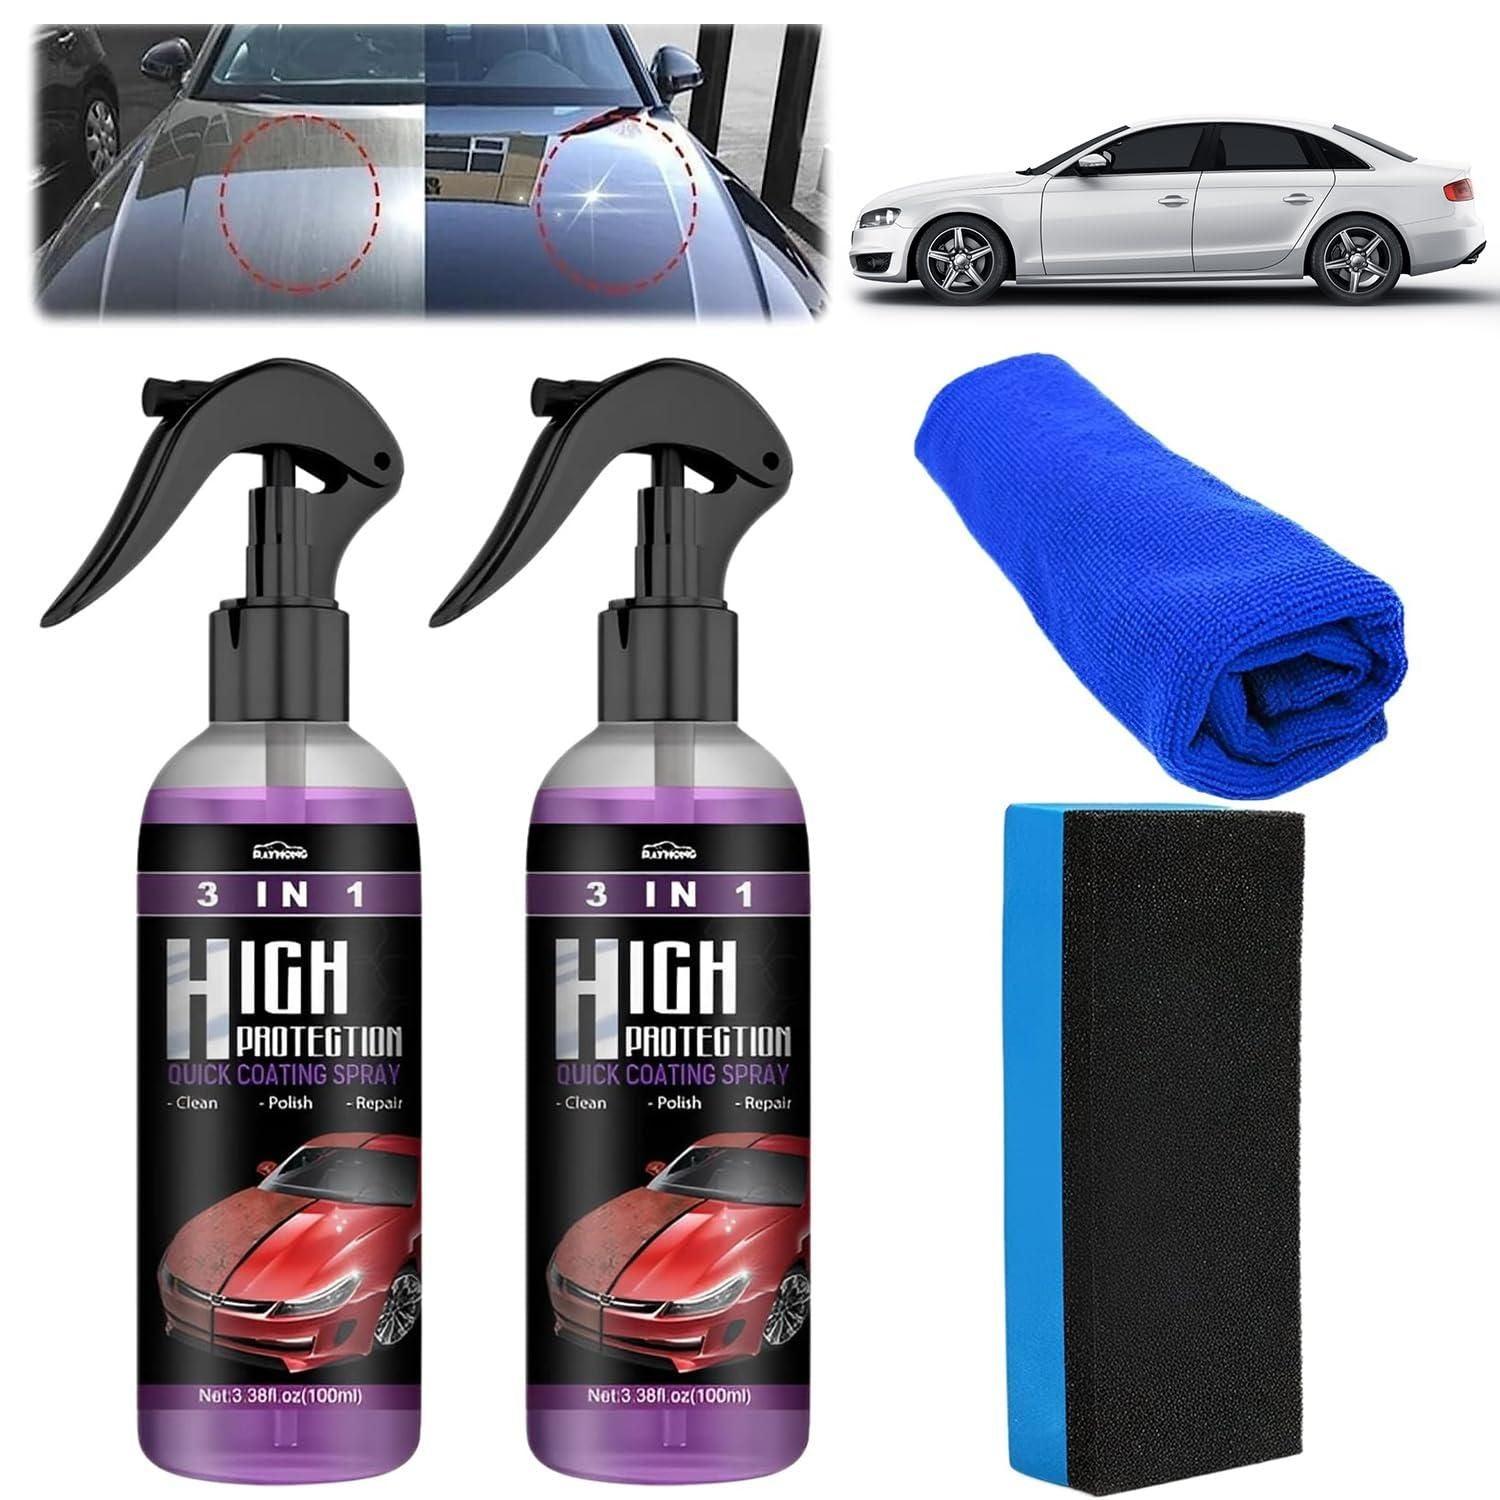 3 in 1 High Protection Quick Car Ceramic Coating Spray - Car Wax Polish  Spray (Pack of